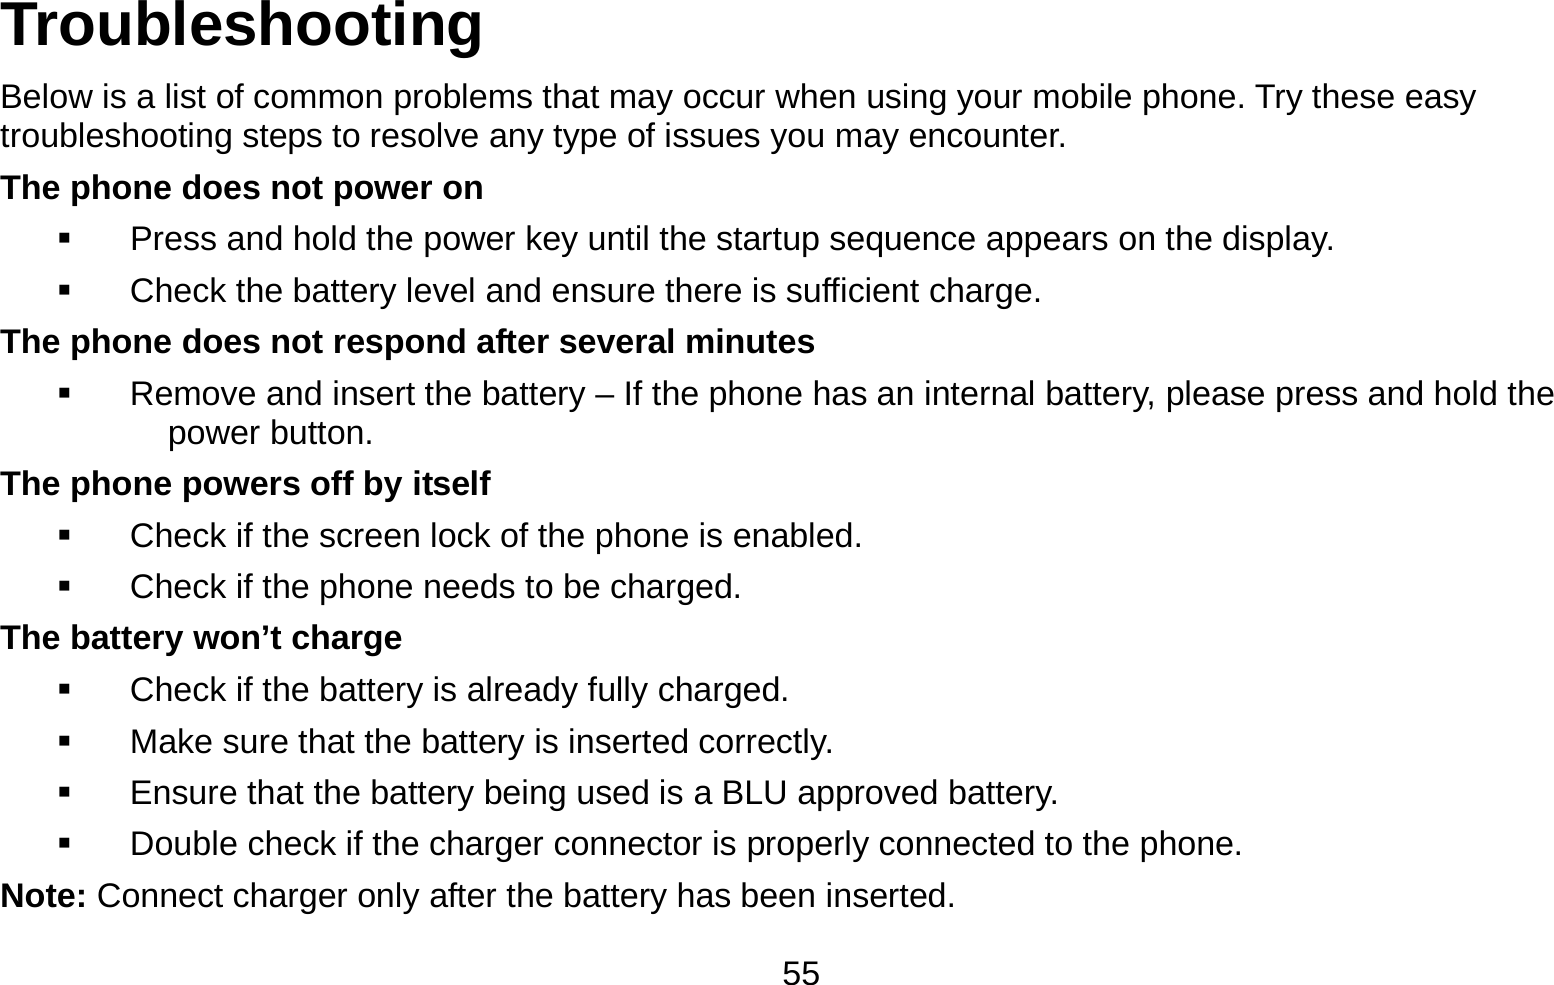   55Troubleshooting Below is a list of common problems that may occur when using your mobile phone. Try these easy troubleshooting steps to resolve any type of issues you may encounter.   The phone does not power on   Press and hold the power key until the startup sequence appears on the display.   Check the battery level and ensure there is sufficient charge. The phone does not respond after several minutes   Remove and insert the battery – If the phone has an internal battery, please press and hold the power button. The phone powers off by itself   Check if the screen lock of the phone is enabled.   Check if the phone needs to be charged. The battery won’t charge   Check if the battery is already fully charged.   Make sure that the battery is inserted correctly.     Ensure that the battery being used is a BLU approved battery.   Double check if the charger connector is properly connected to the phone. Note: Connect charger only after the battery has been inserted. 